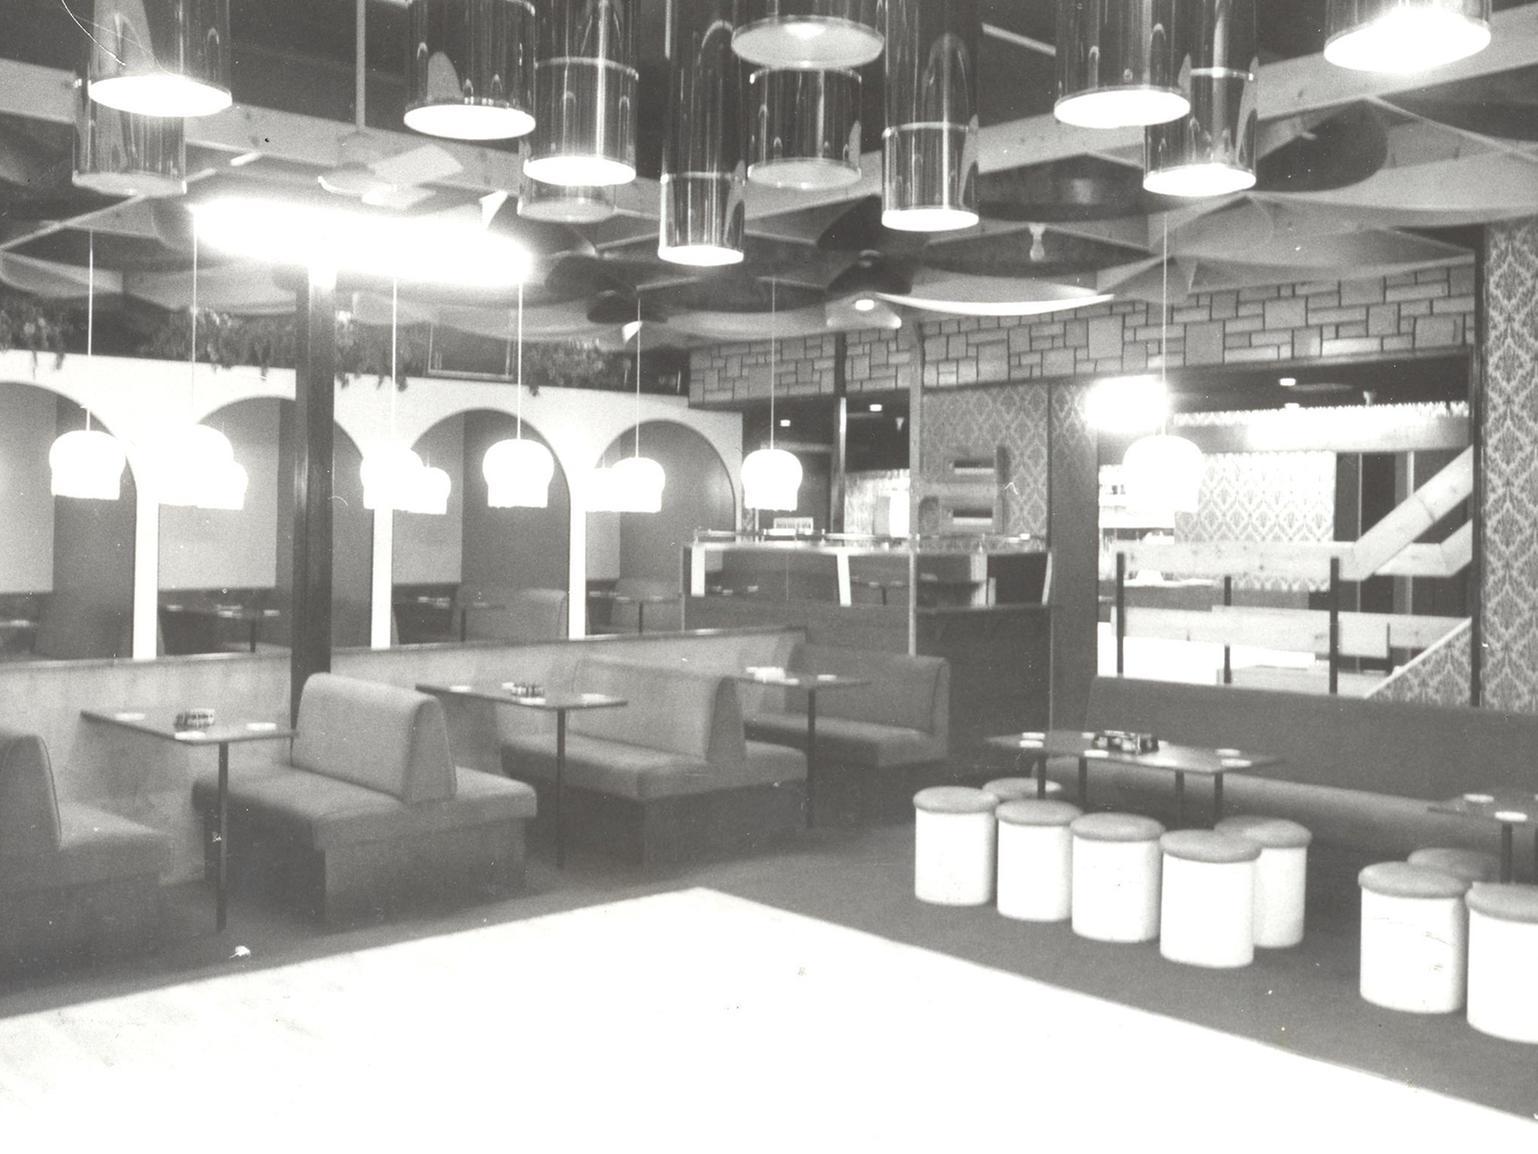 This photo from April 1977 shows the downstairs section of the nightclub at Armley in west Leeds.